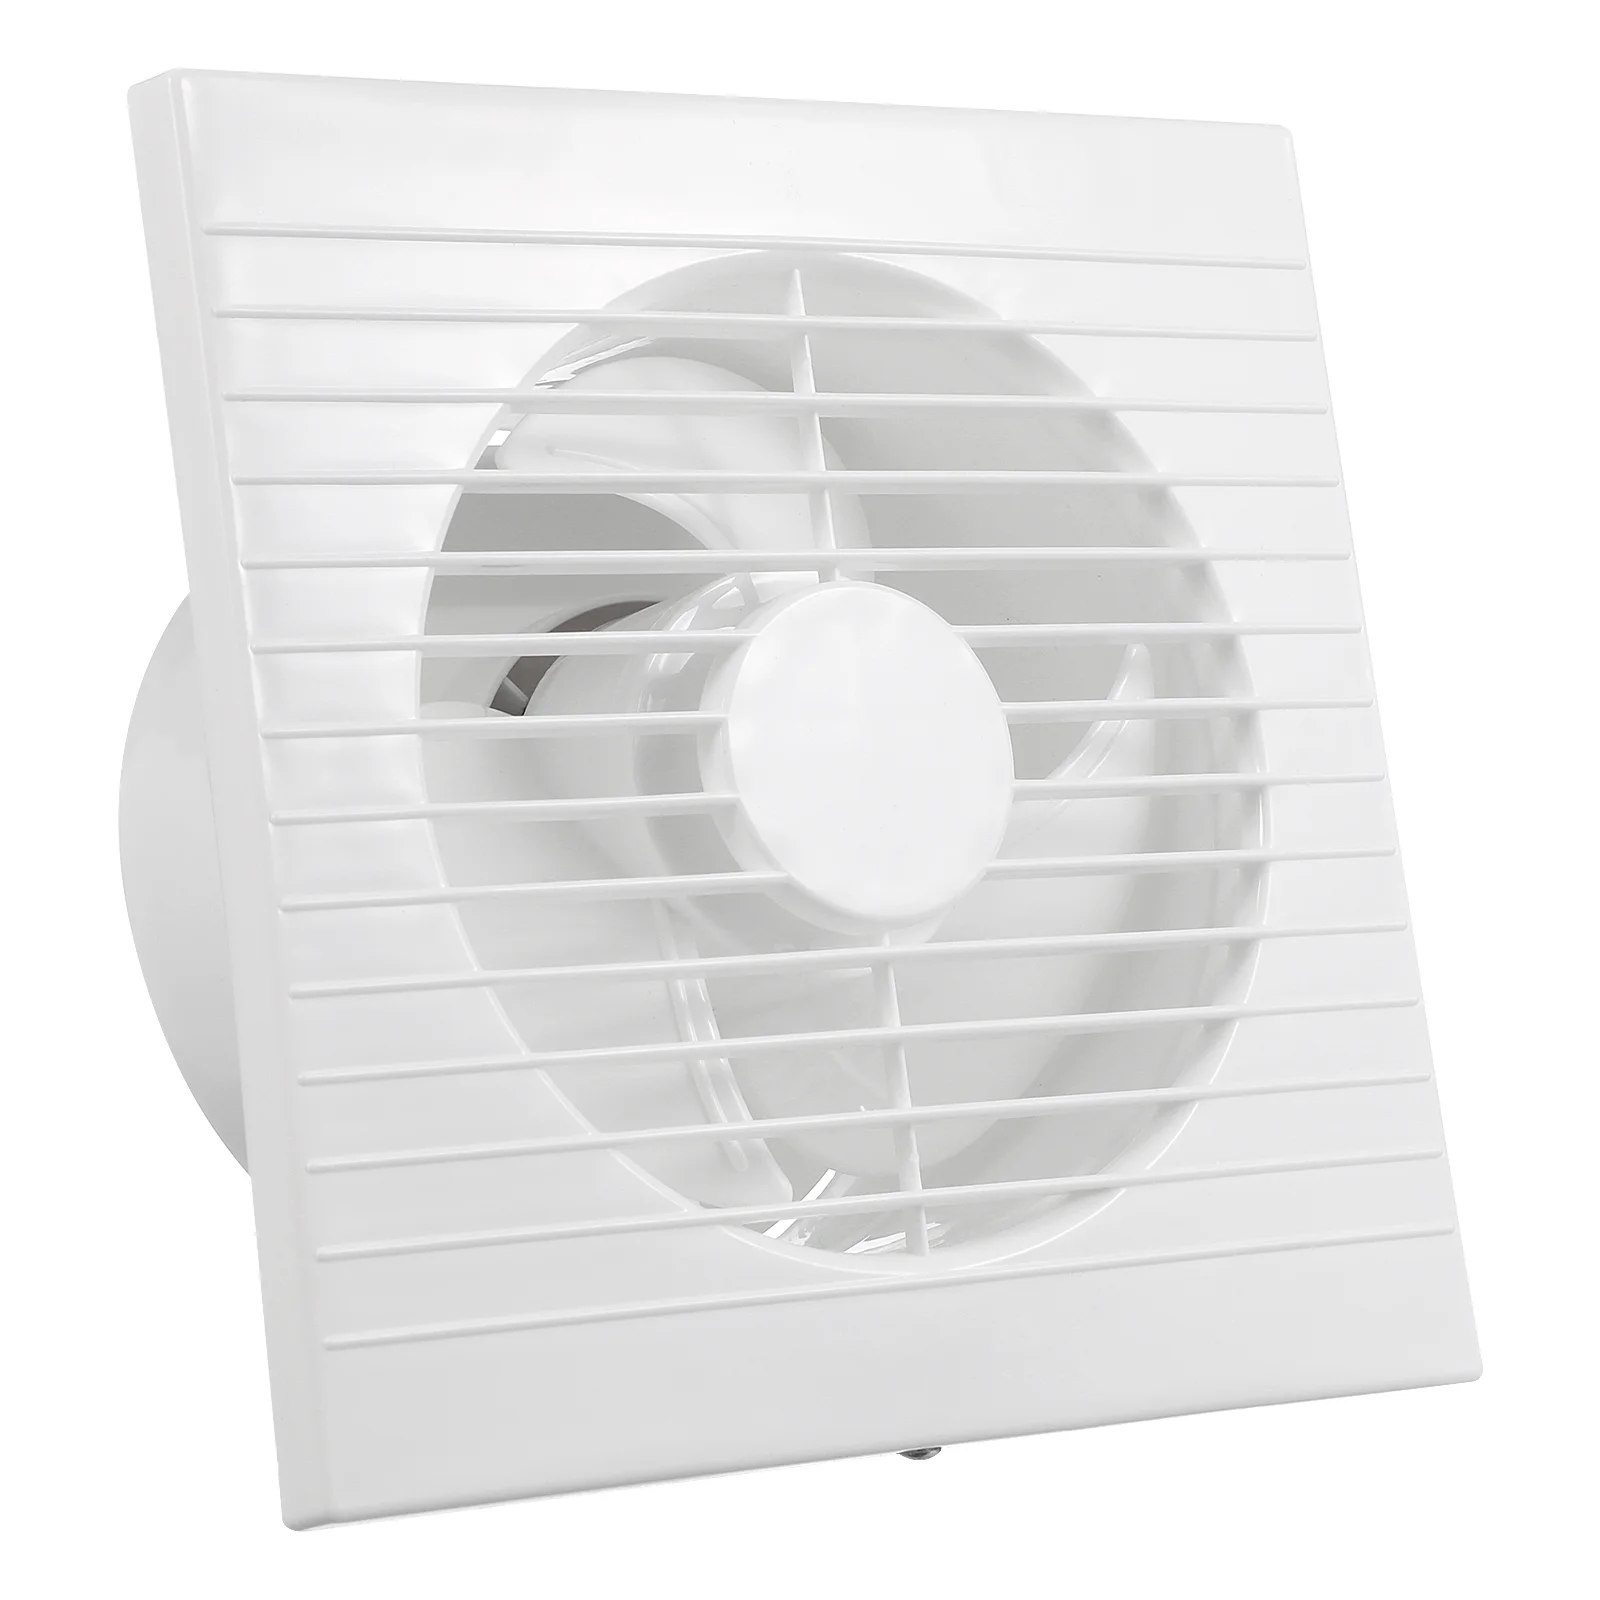 

Wall Mounted Fan Bathroom Air Vent Ventilation Kitchen Exhaust Rice Noodle Office